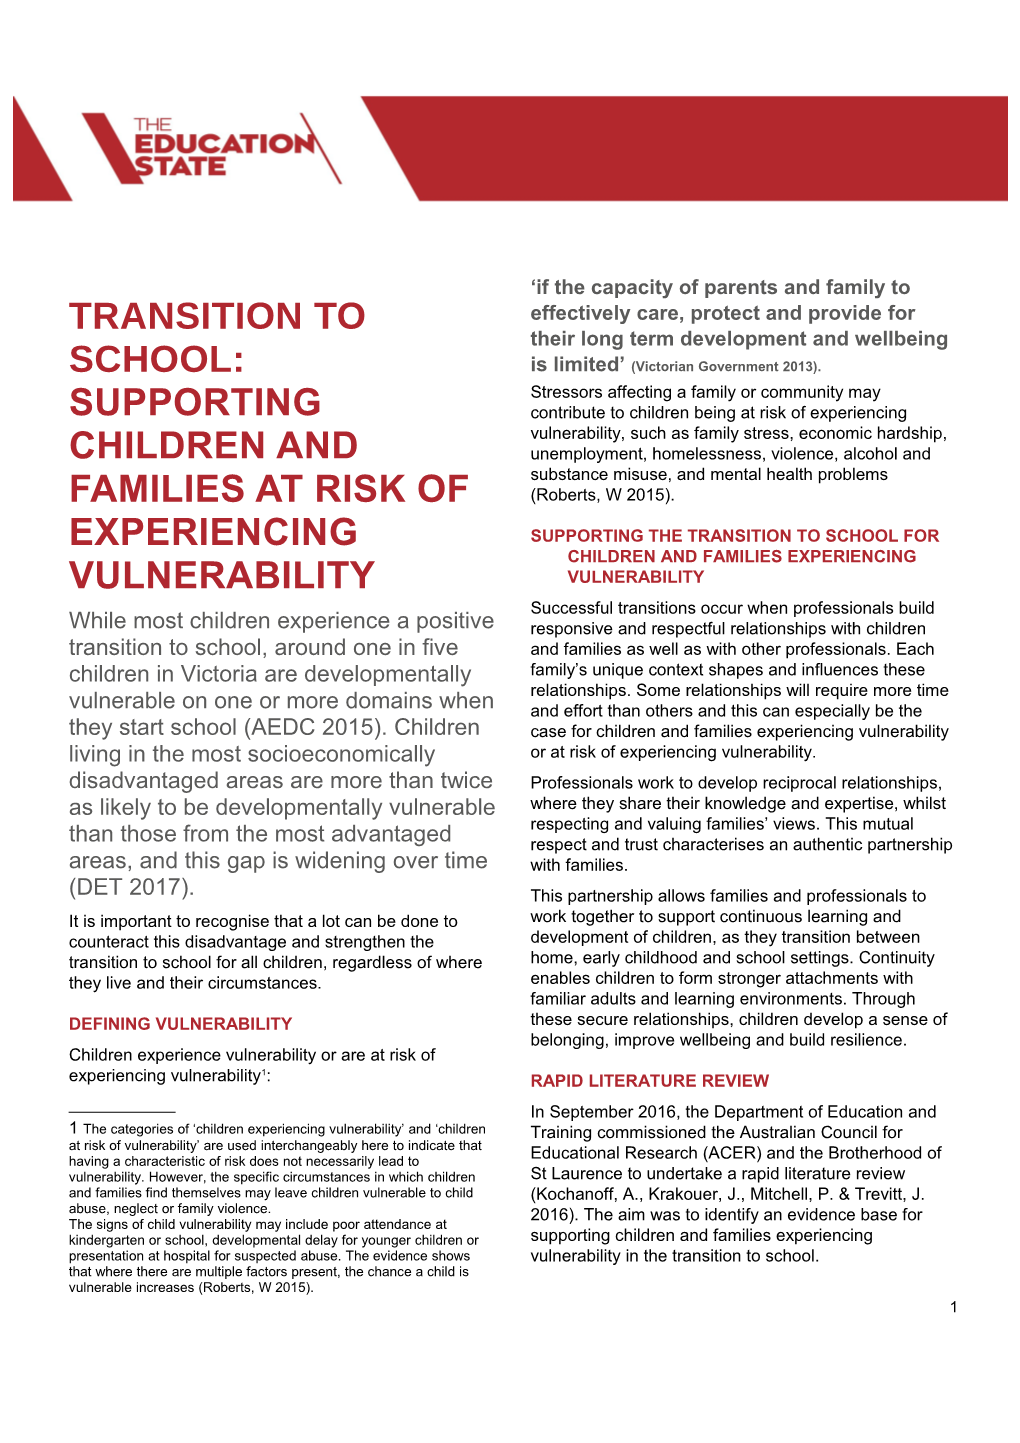 TRANSITION to School: Supporting Children and Families at Risk of Experiencing Vulnerability